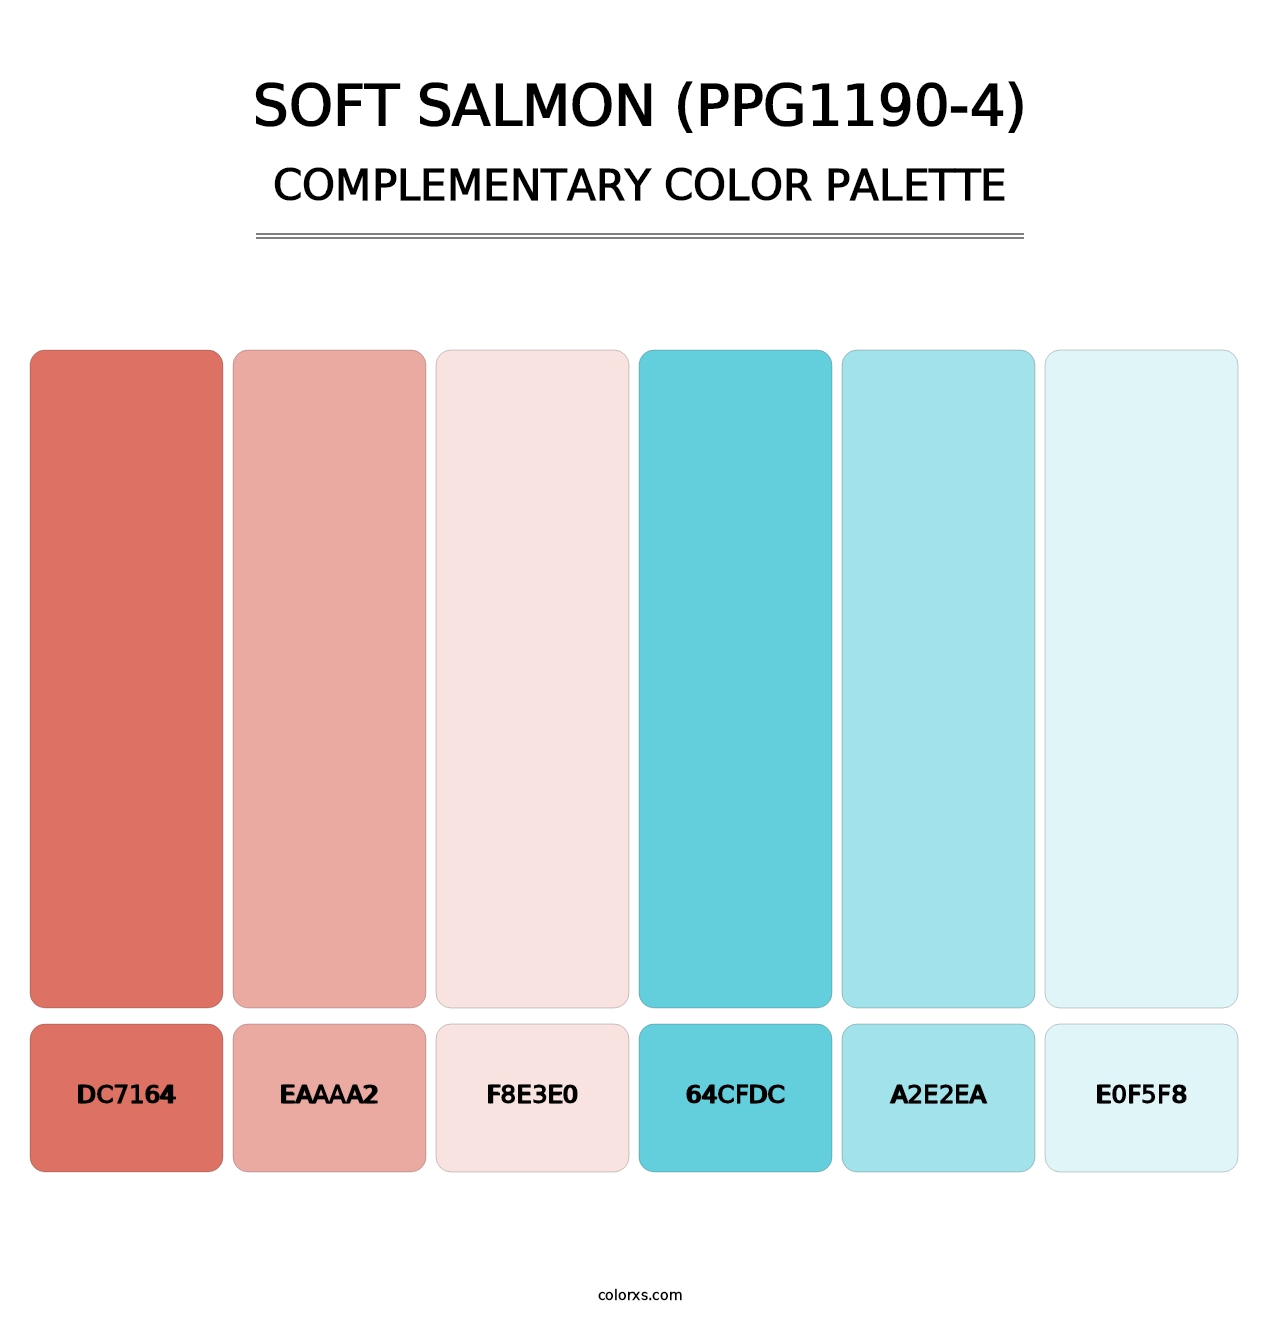 Soft Salmon (PPG1190-4) - Complementary Color Palette